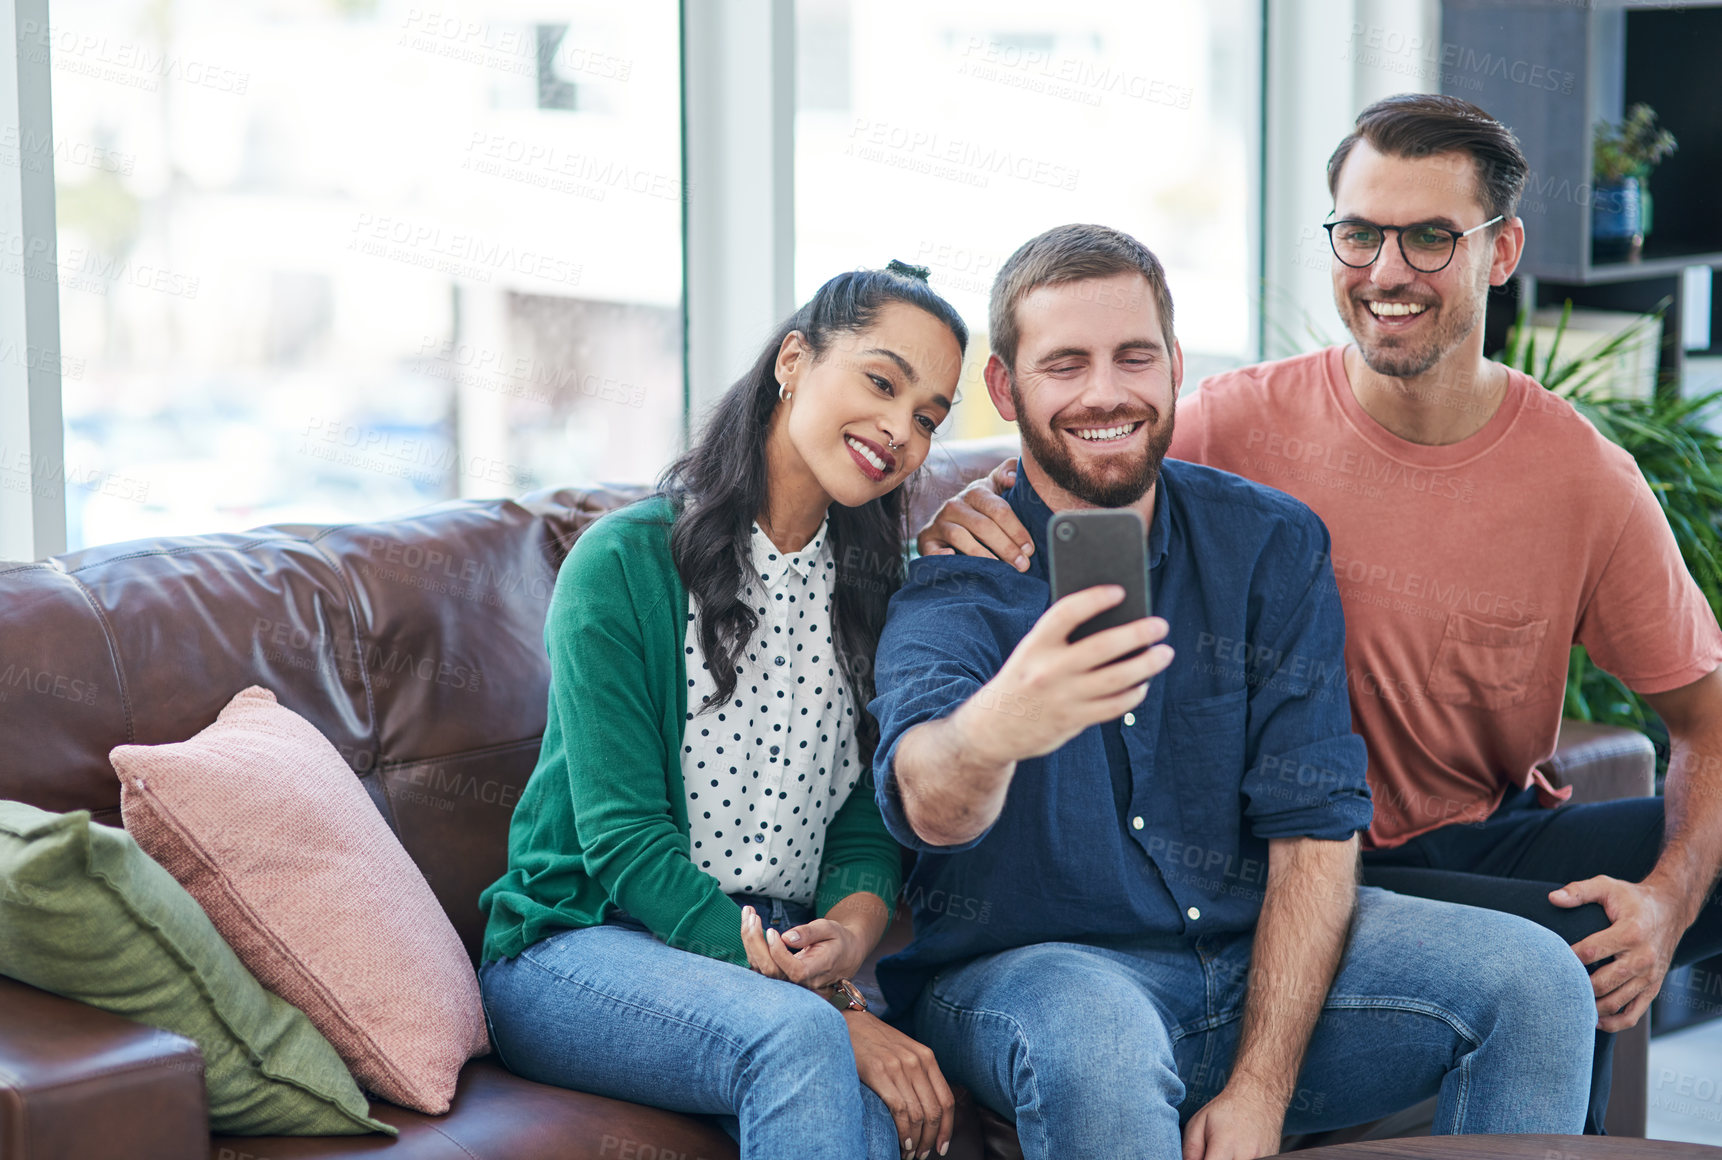 Buy stock photo Shot of two young men and a woman taking selfies together on a sofa